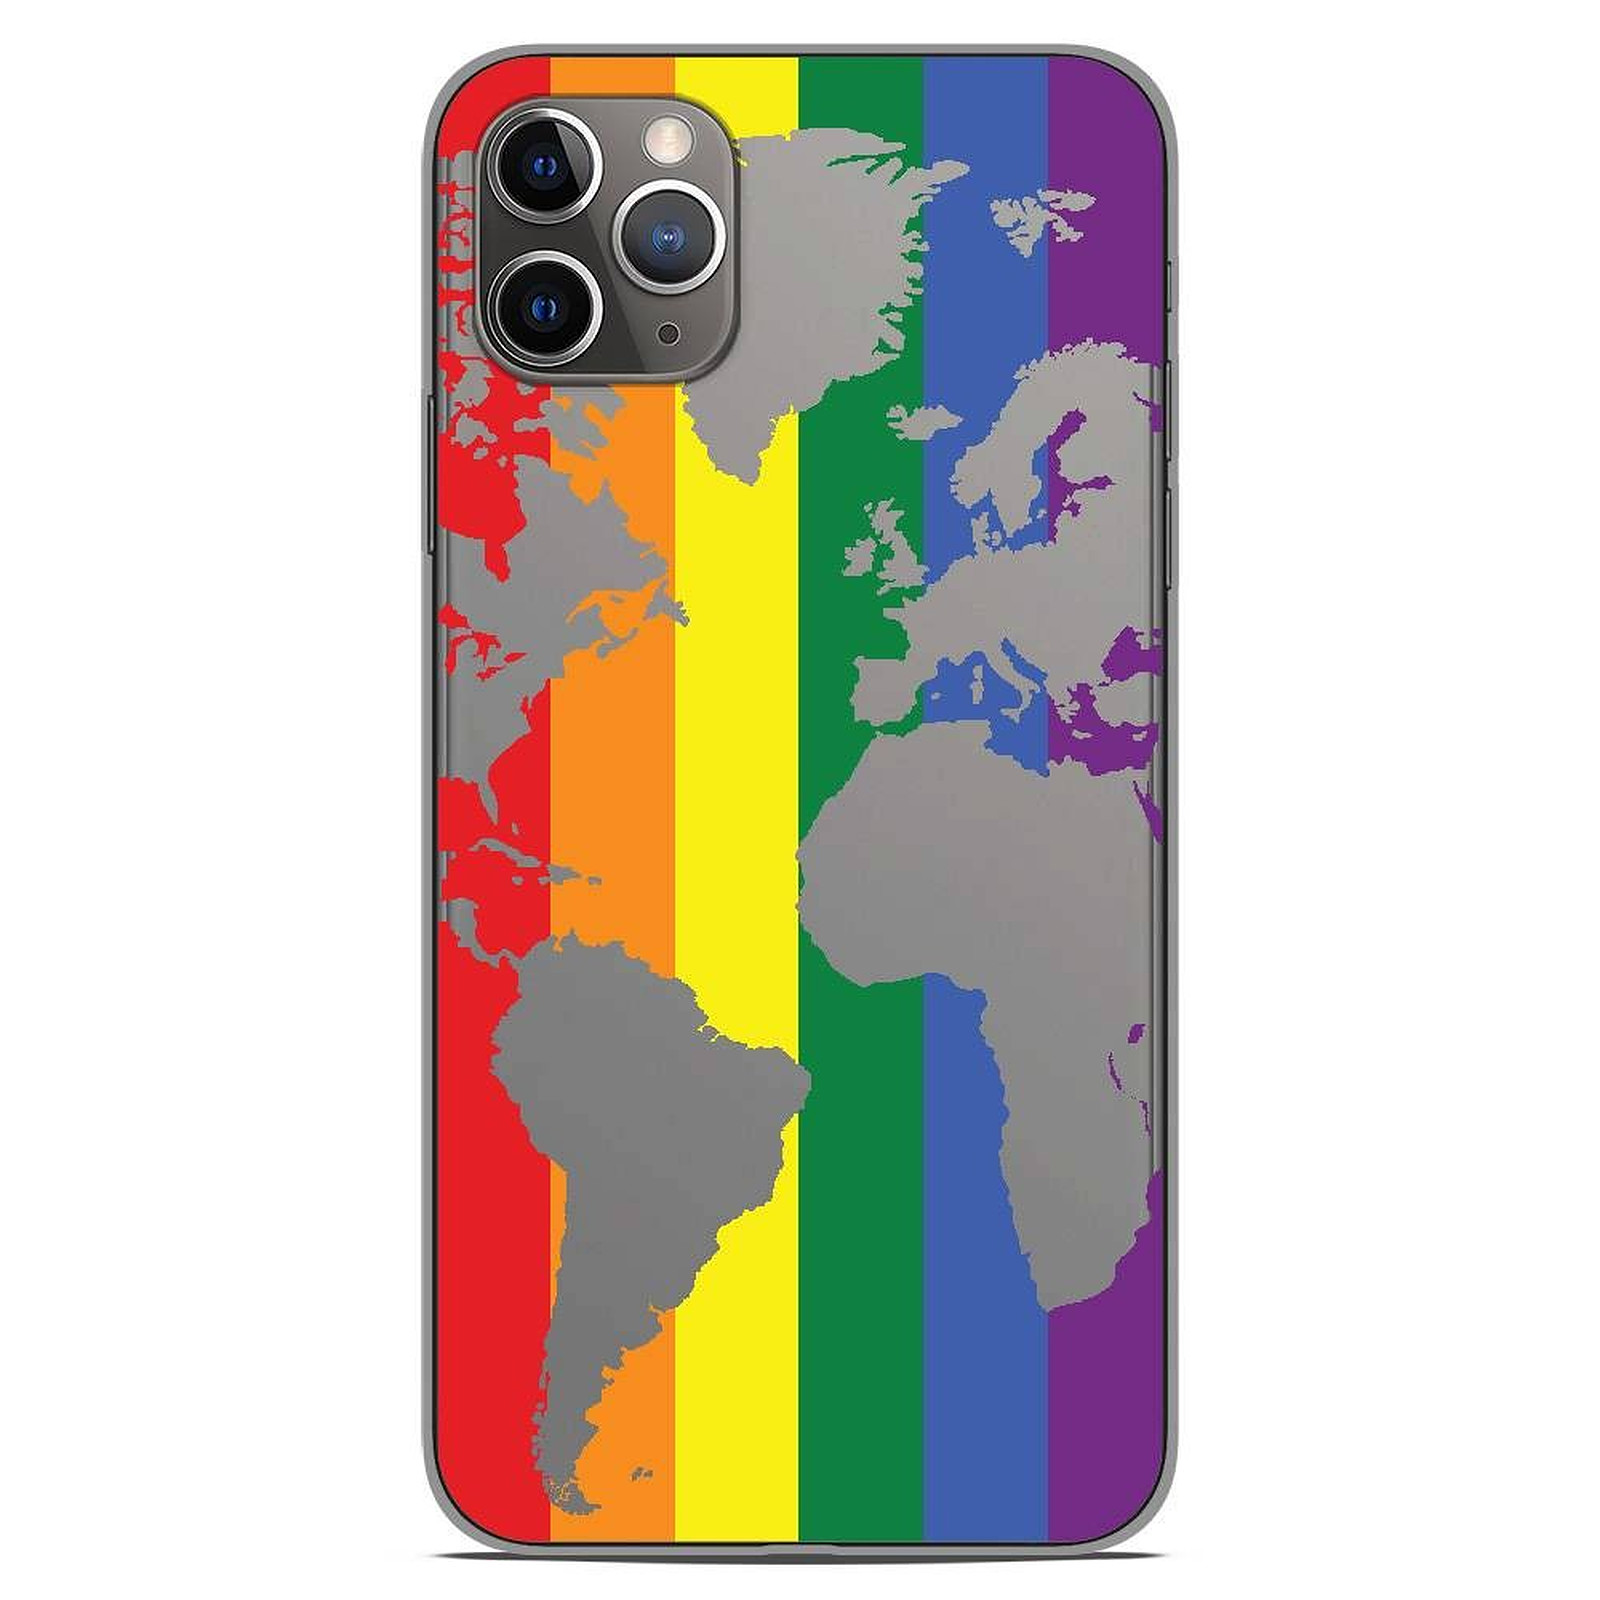 1001 Coques Coque silicone gel Apple iPhone 11 Pro Max motif Map LGBT - Coque telephone 1001Coques